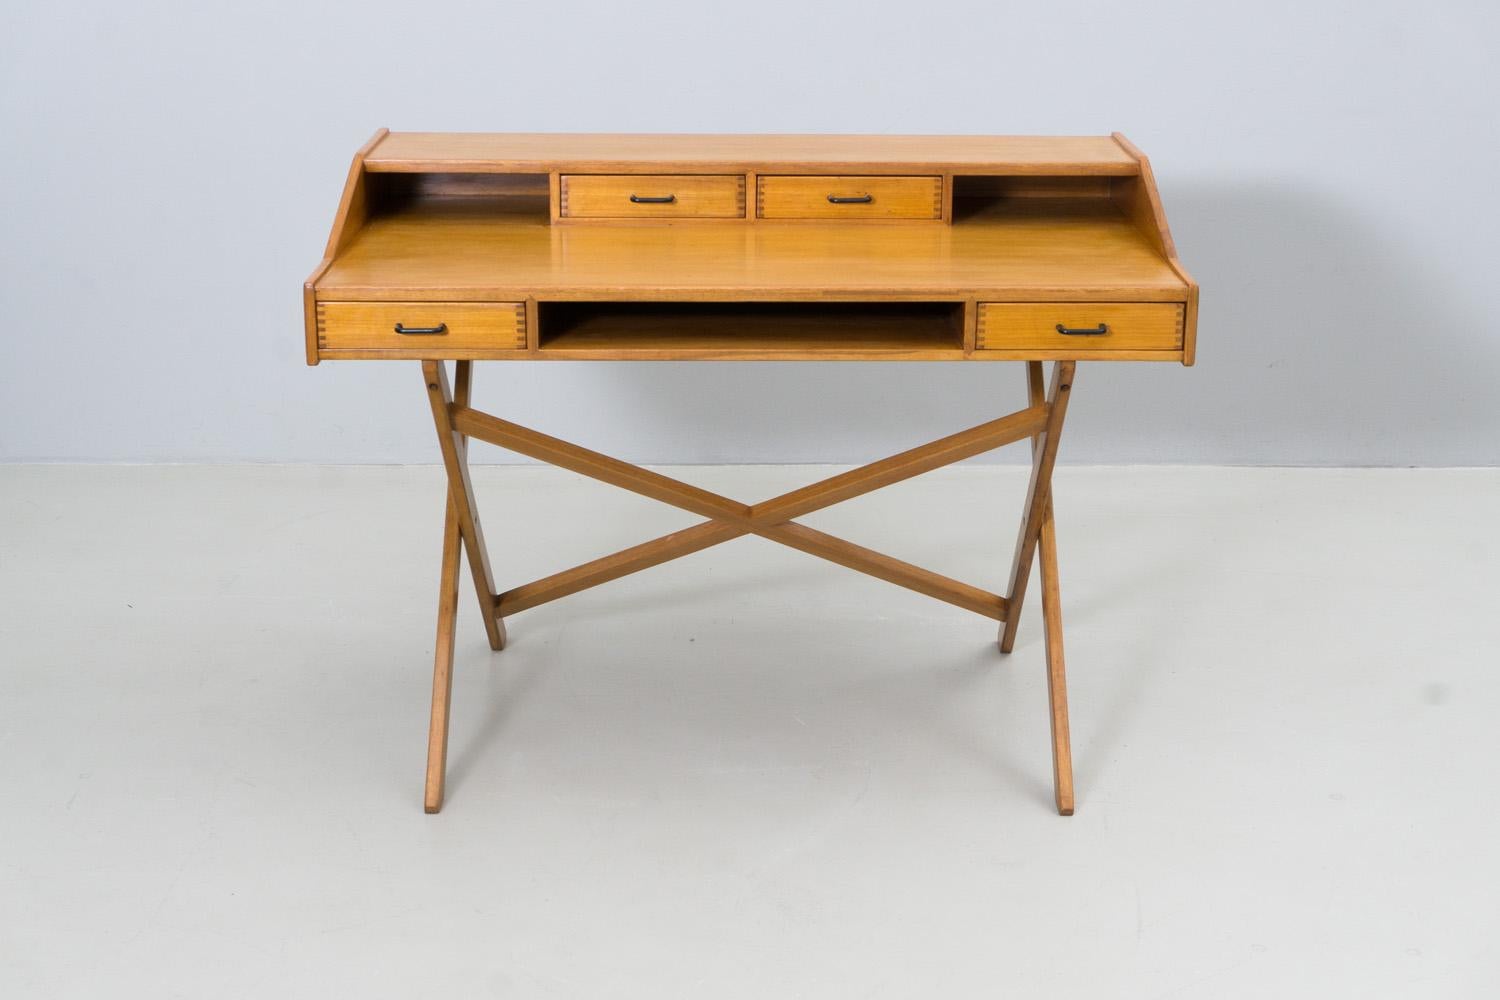 Very elegant writing desk with four drawers and open compartments on both sides. Made of solid walnut wood, handles are made of blackened metal.
Height of writing surface 70 cm
Gianfranco Frattini was born in Padua in 1926 and graduated in